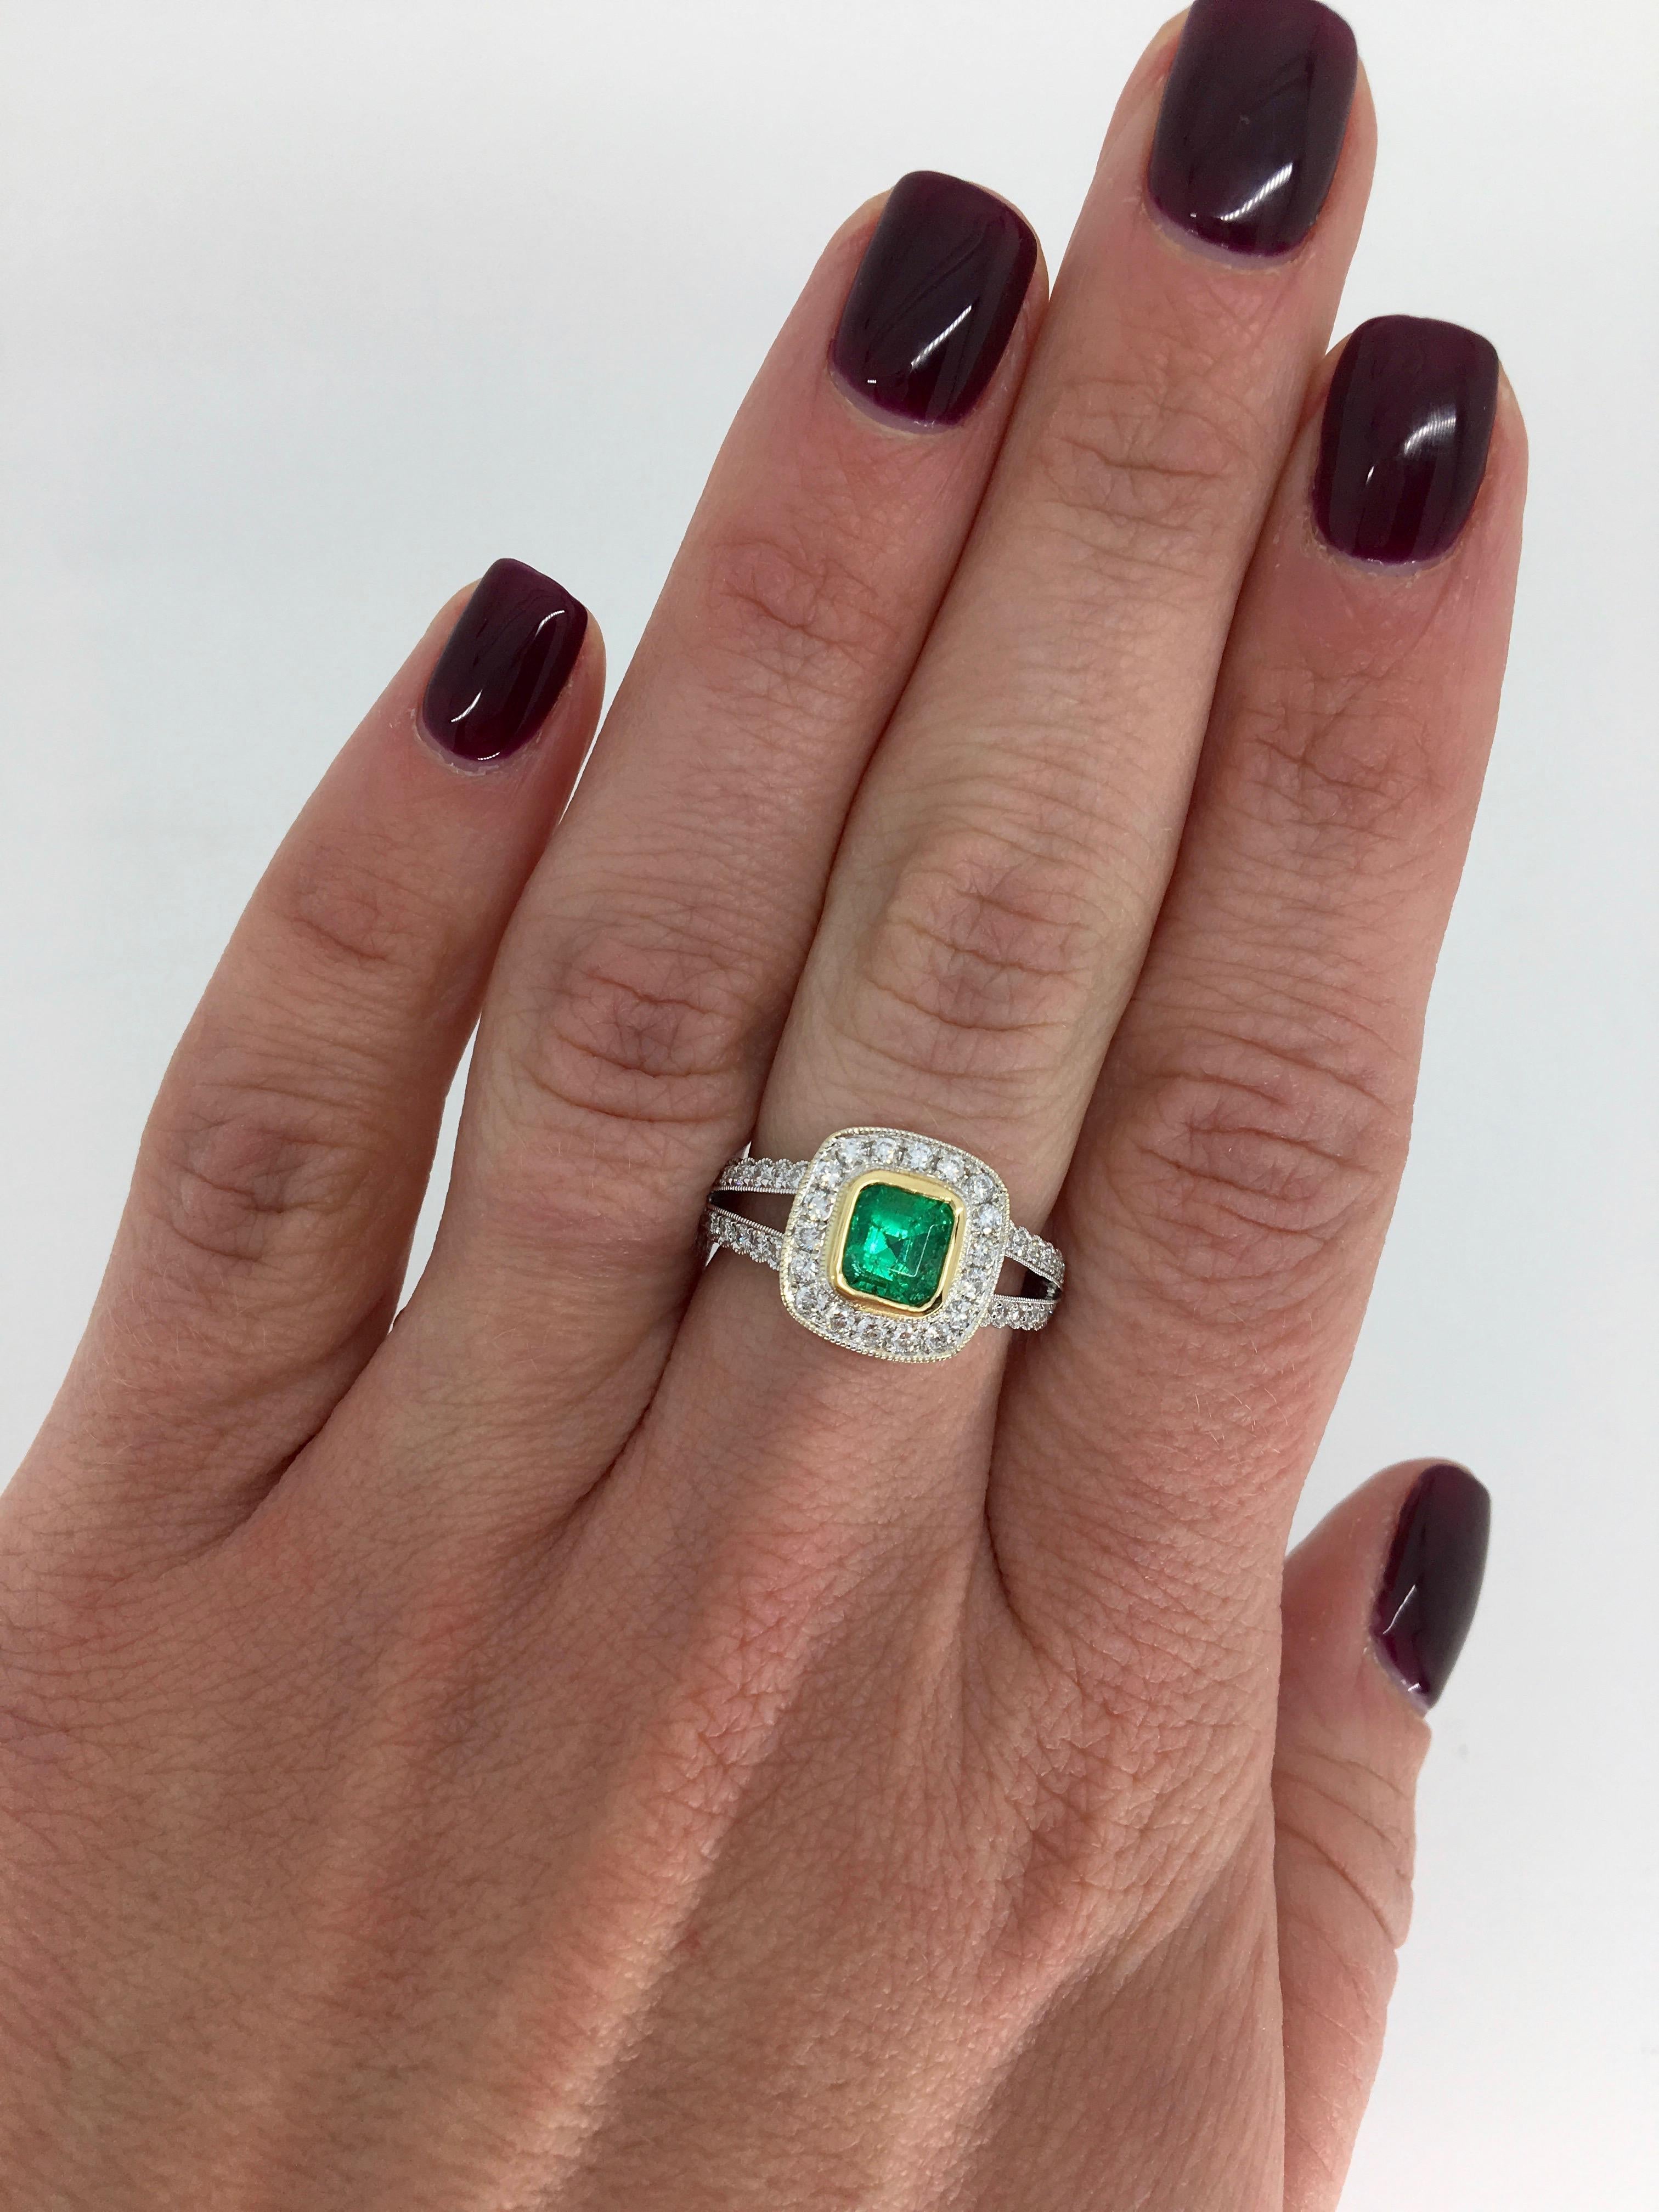 Stunning 18k Two Tone Gold Split shank halo style ring featuring a beautiful approximately 1.00CT Cushion Shaped Emerald. 

Gemstone: Emerald and Diamond
Gemstone Carat Weight: Approximately 1.00CT Cushion Shaped Emerald
Diamond Carat Weight: